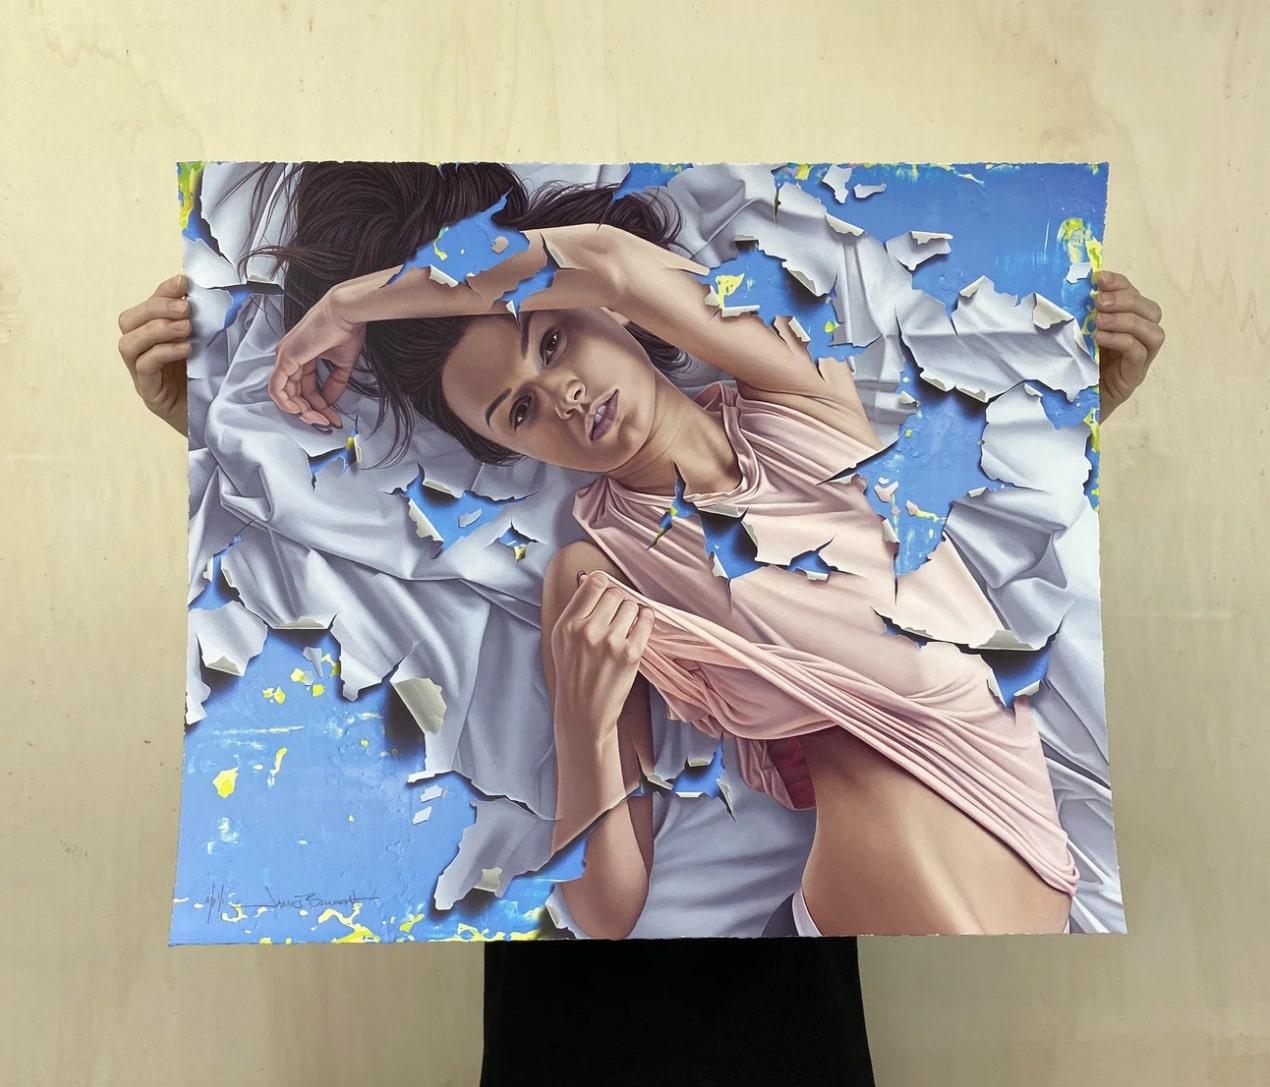 3 Days (Blue/Yellow Variant Ed. 1/1) - Print by James Bullough